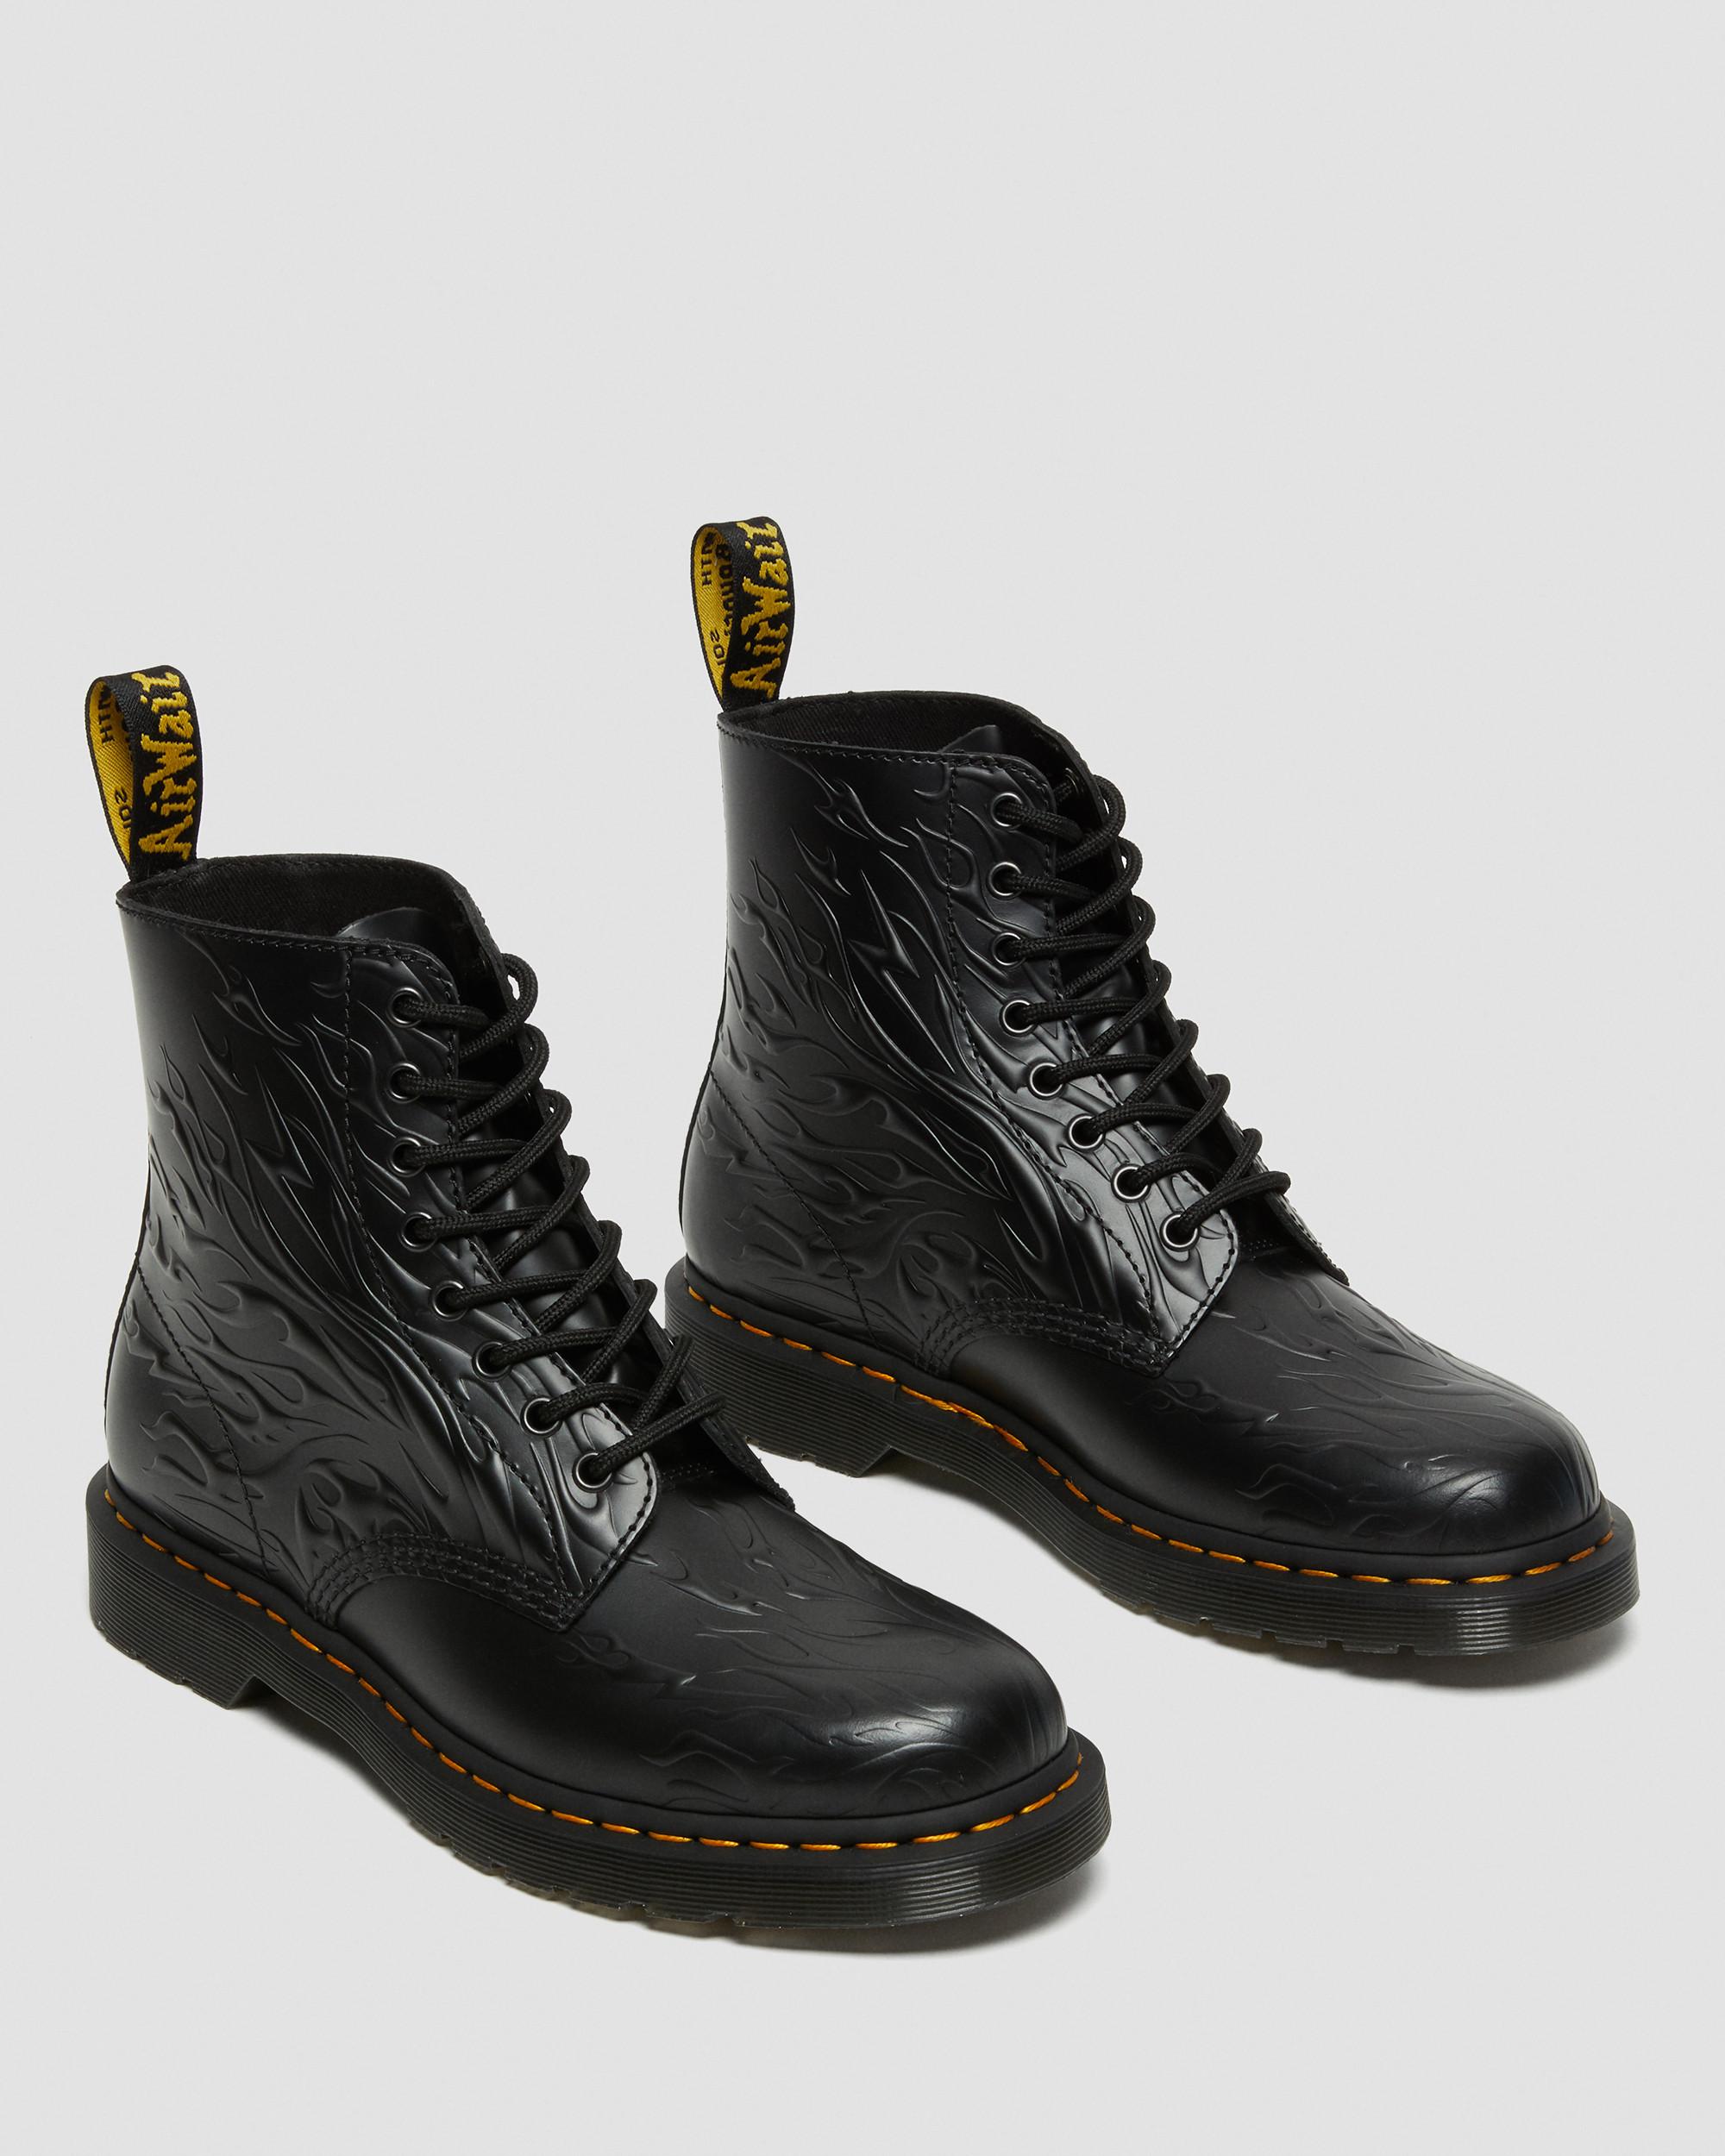 1460 Flames Emboss Leather Lace Up Boots in Black | Dr. Martens